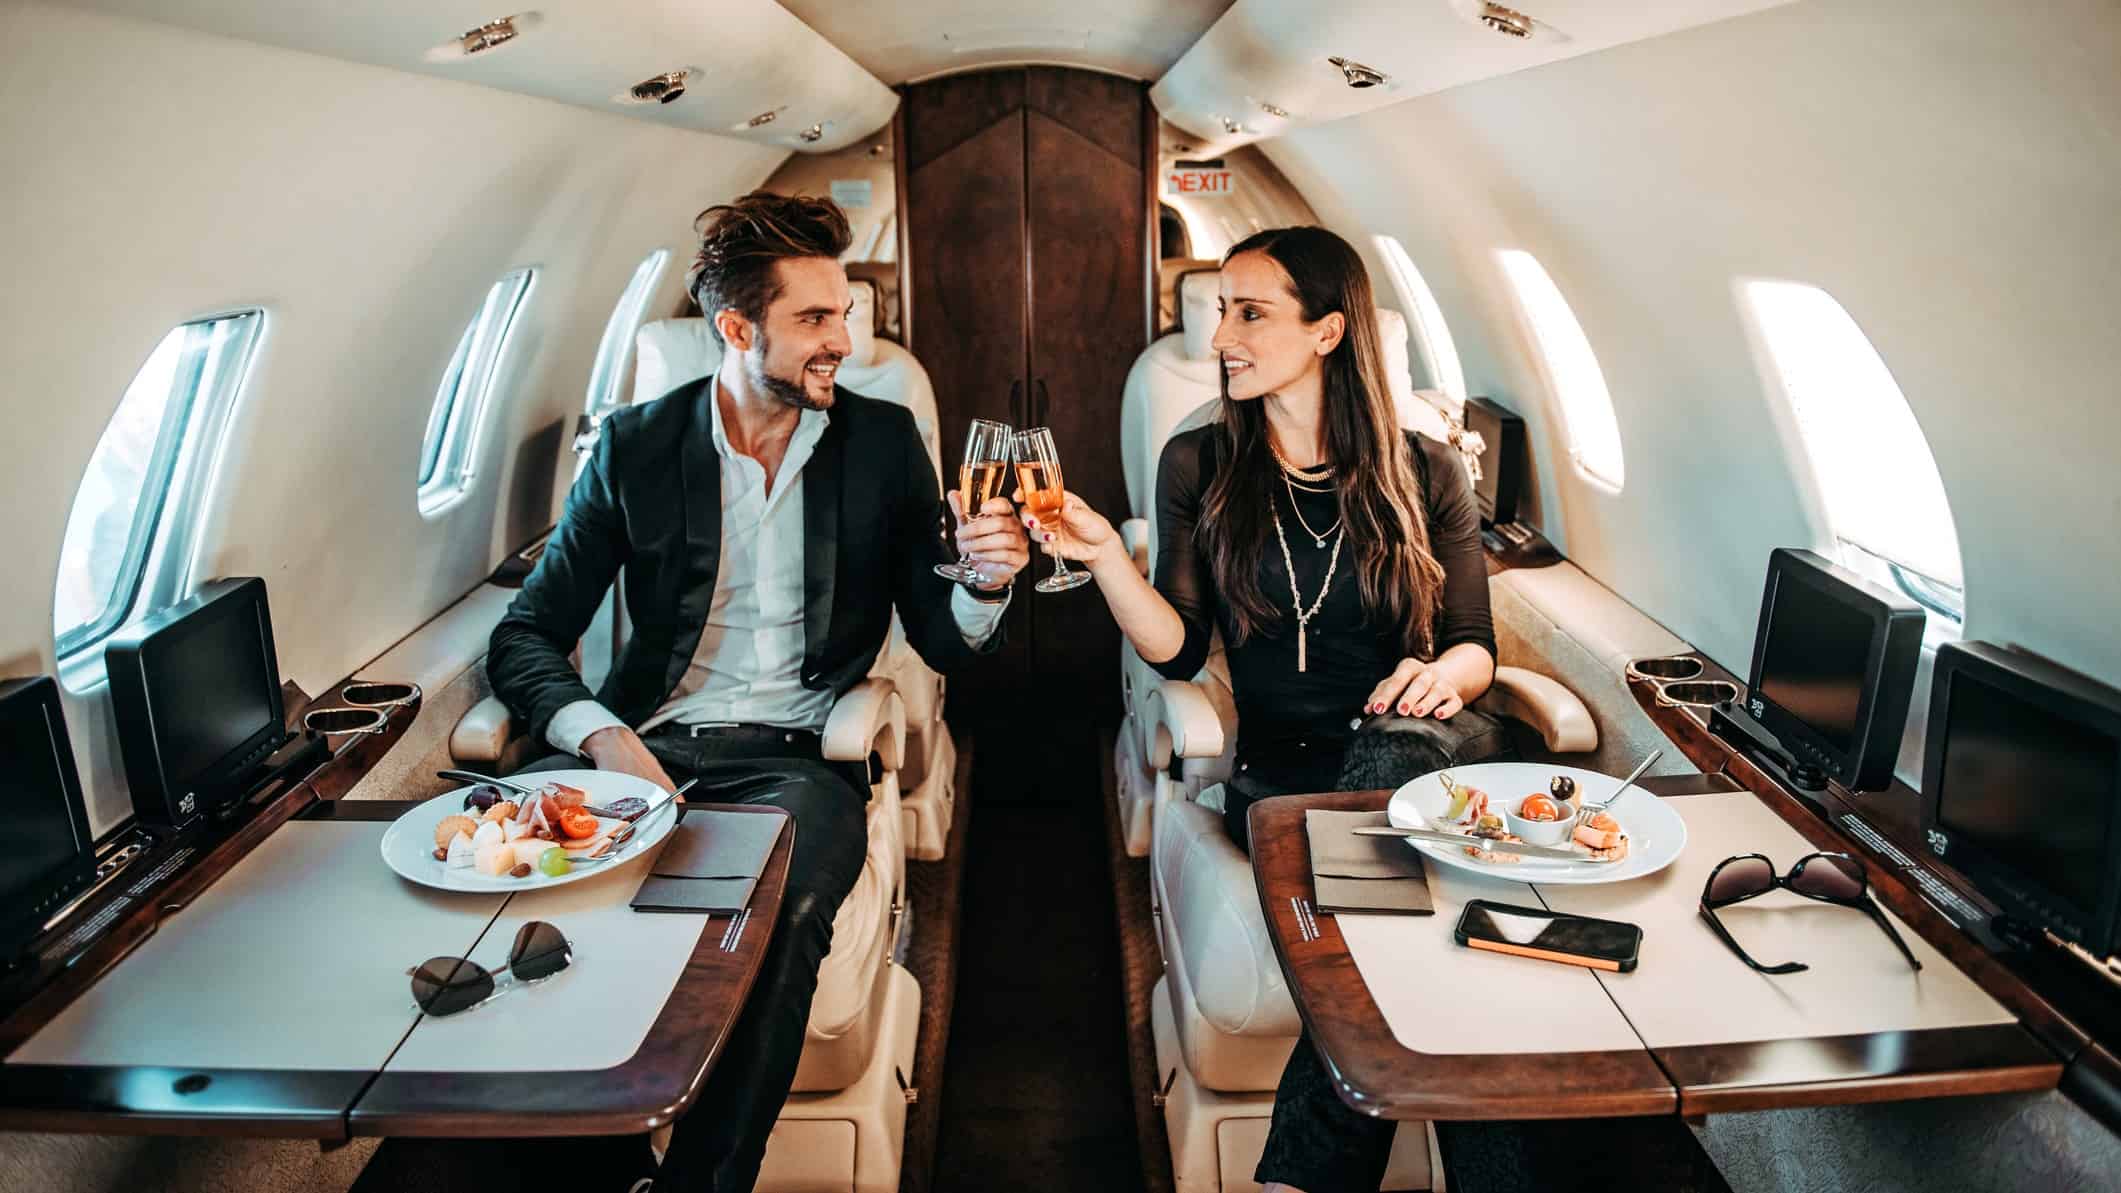 a couple clink champagne glasses on board a private aircraft with gourmet food plates set in front of them. They are wearing designer clothes and looking wealthy.